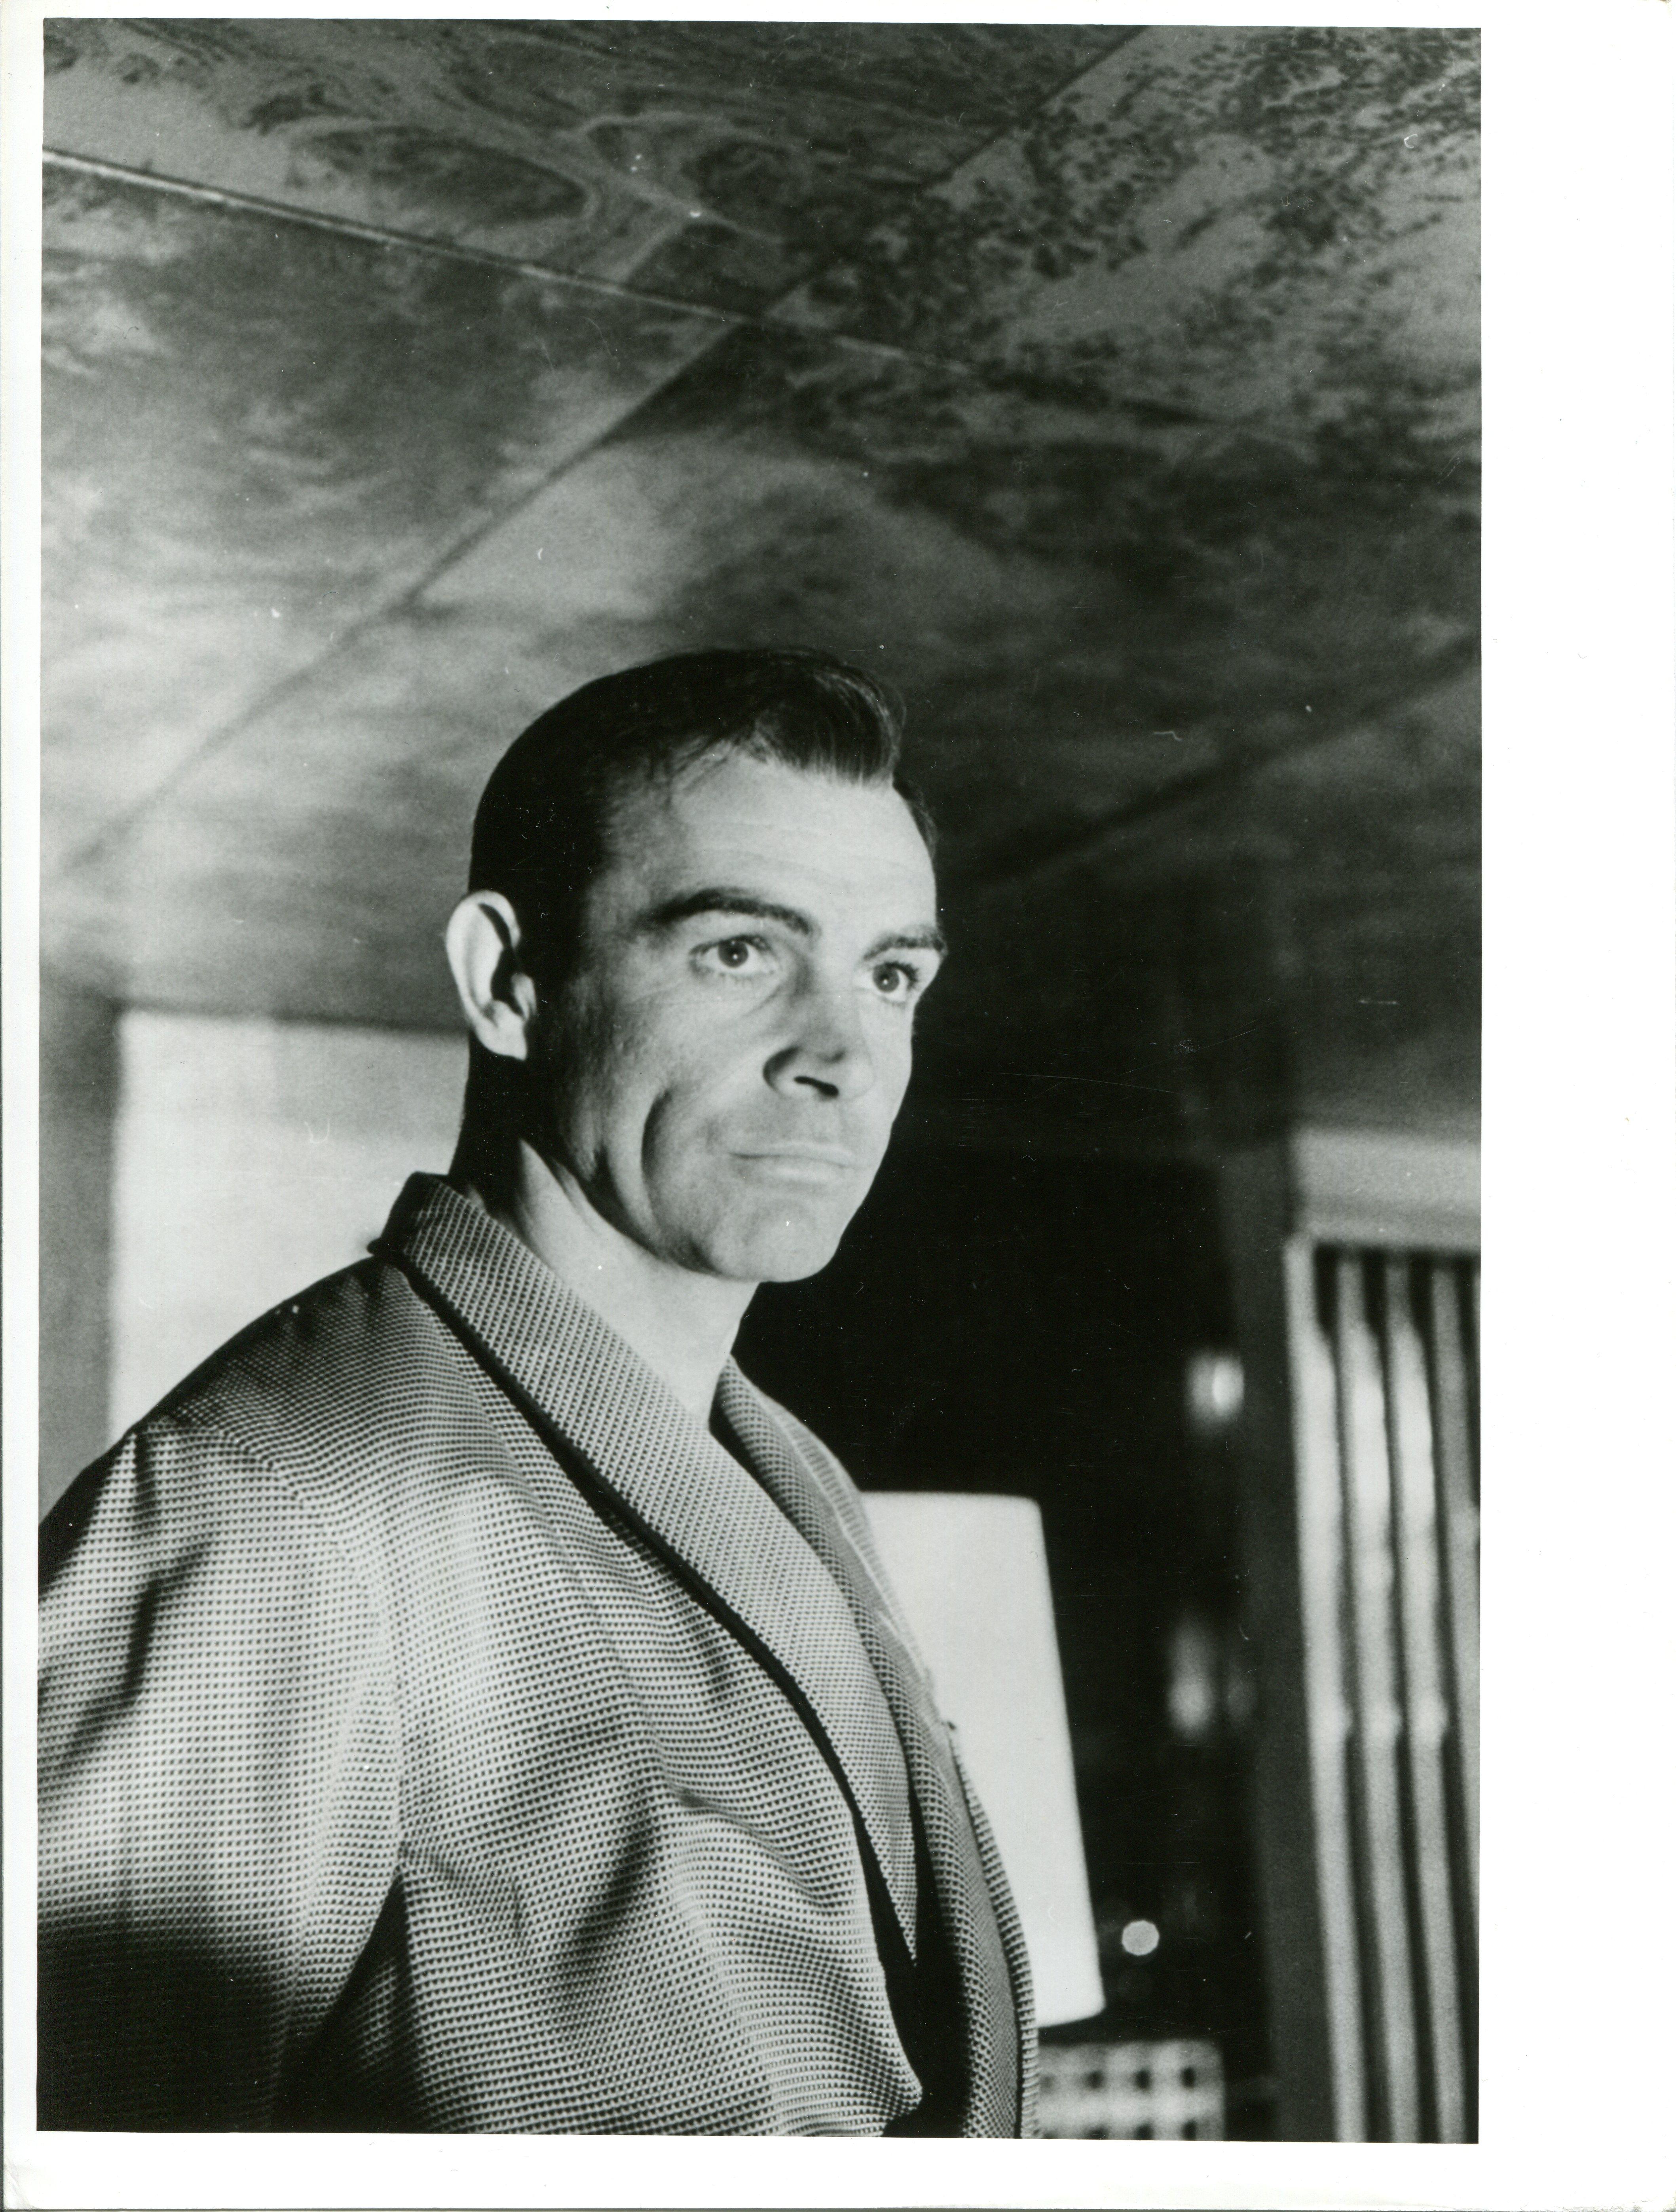 Henri Elwing  Black and White Photograph - Sean Connery as James Bond in "Nr. No"